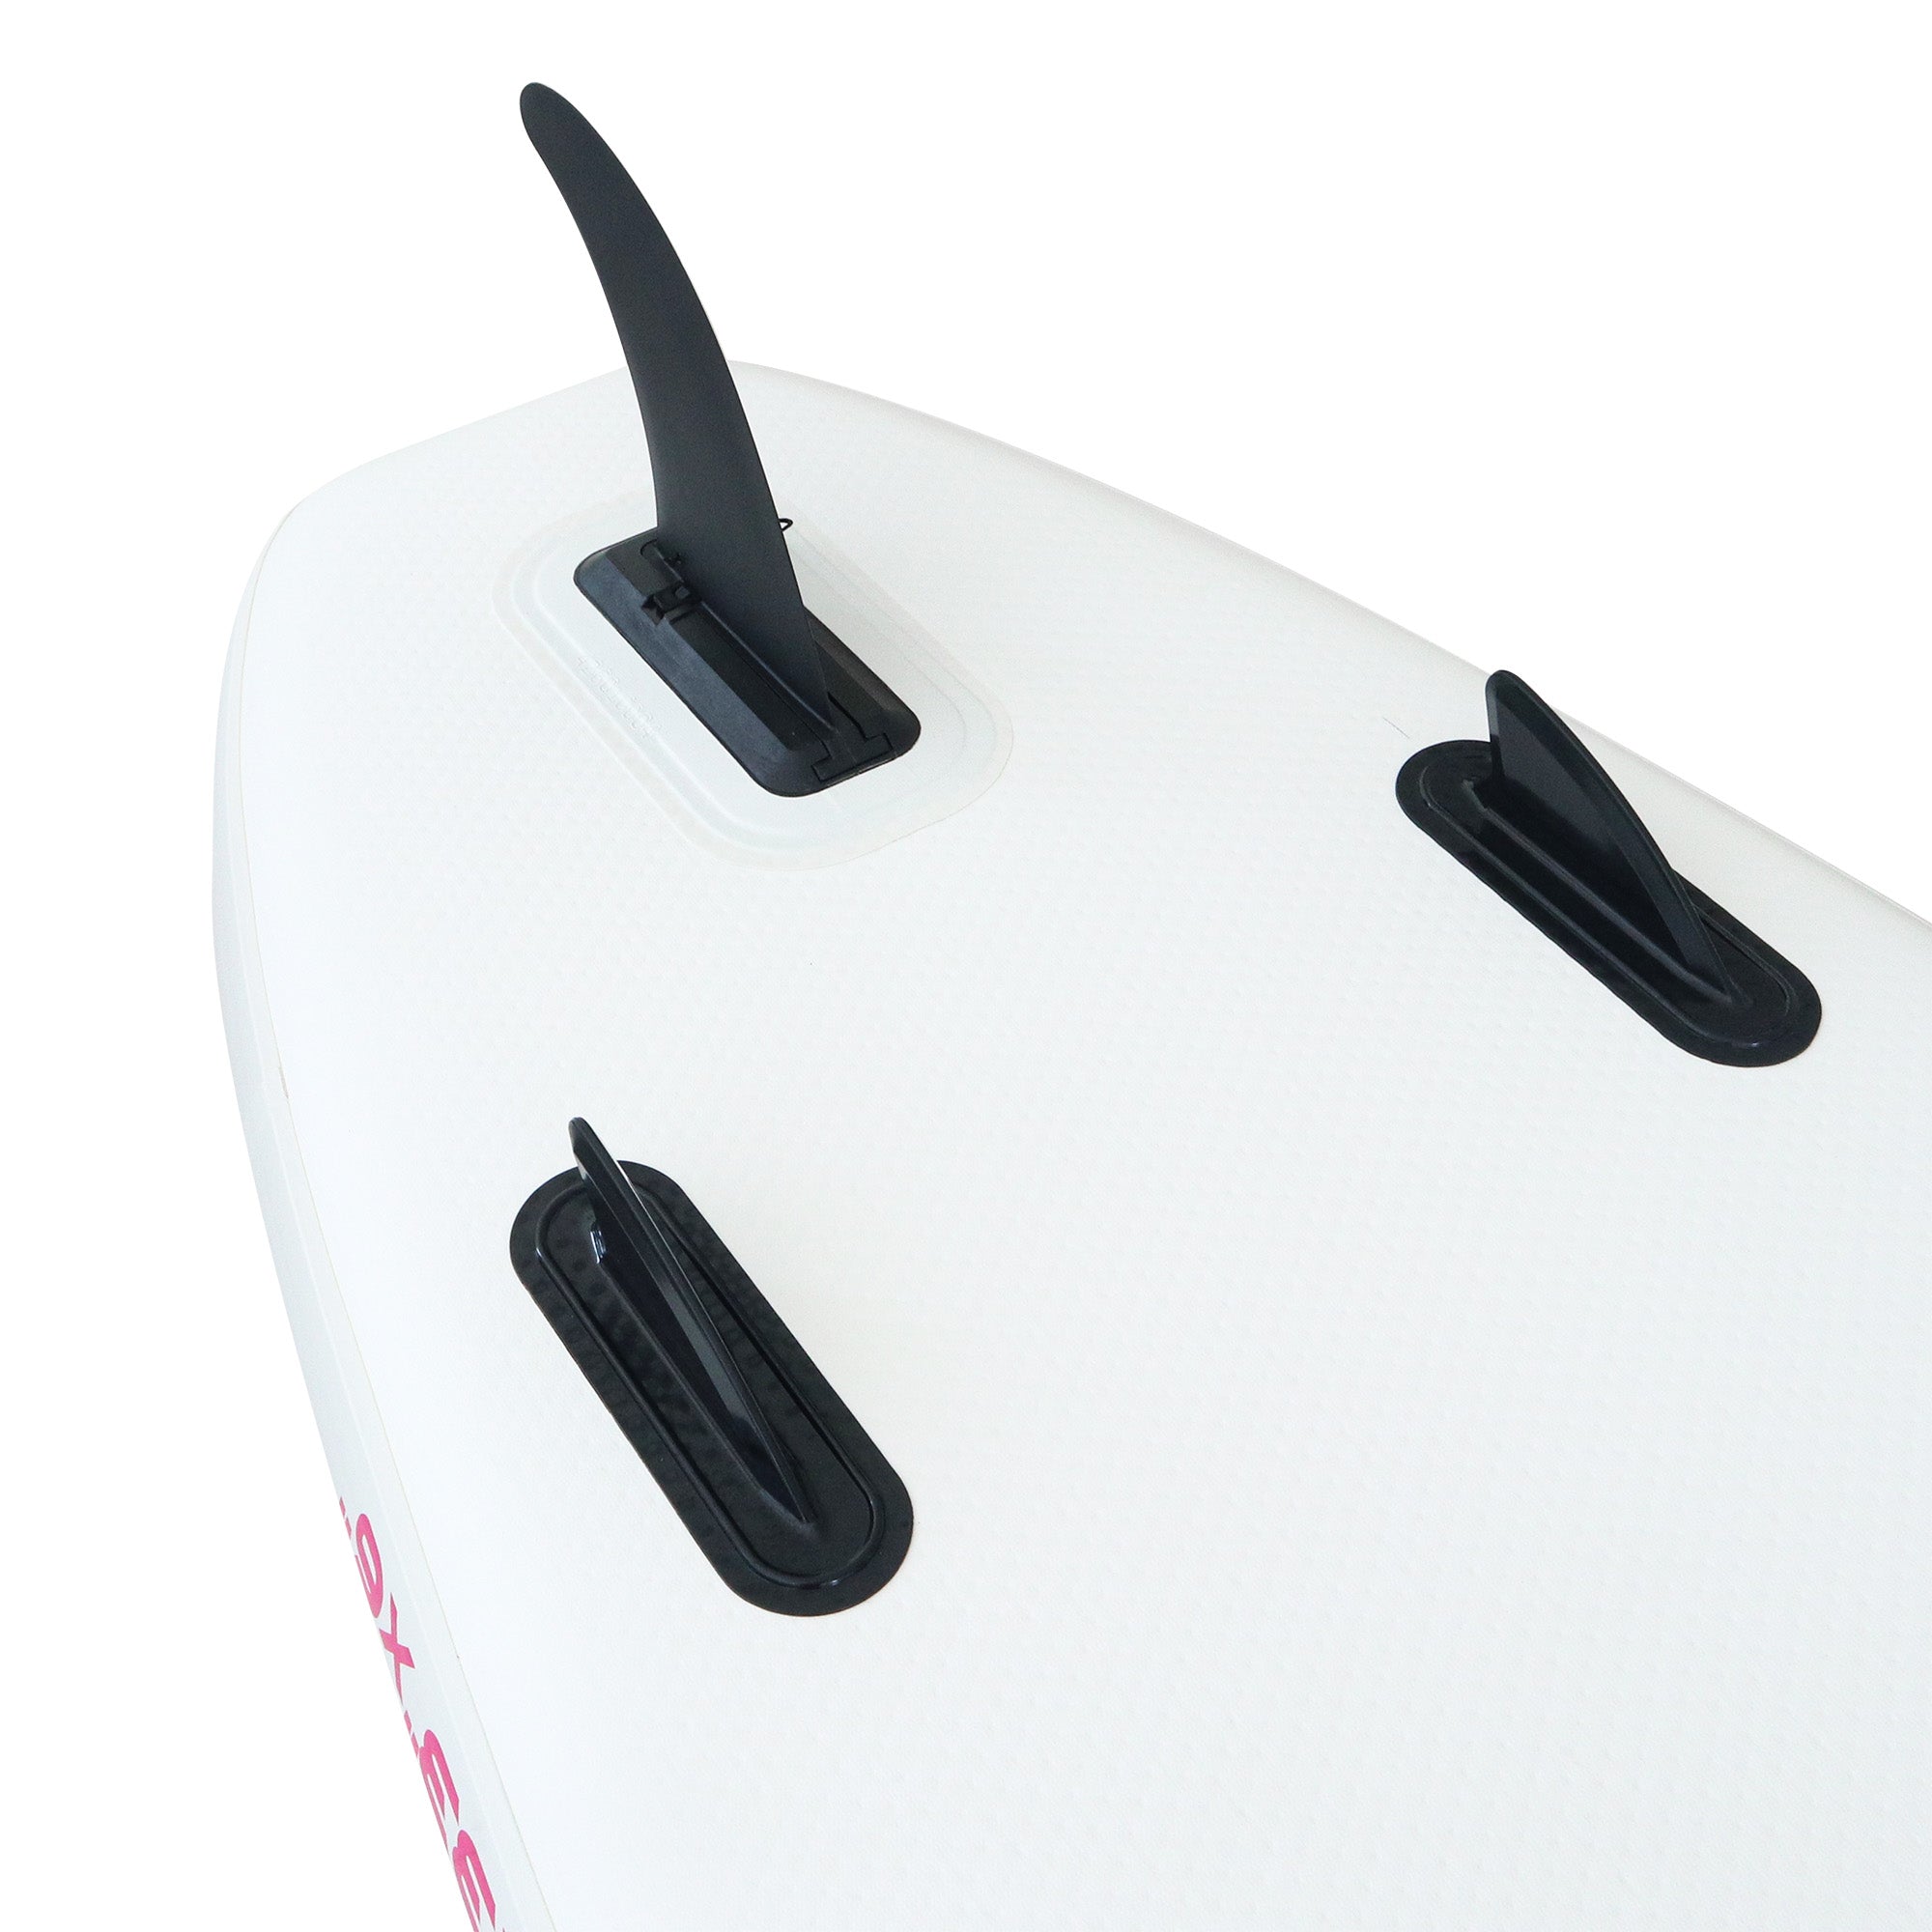 AKD DOLPHIN Stand Up Paddle Board 11' 335x83x15cm SUP Board 170kg/346L (Pink)